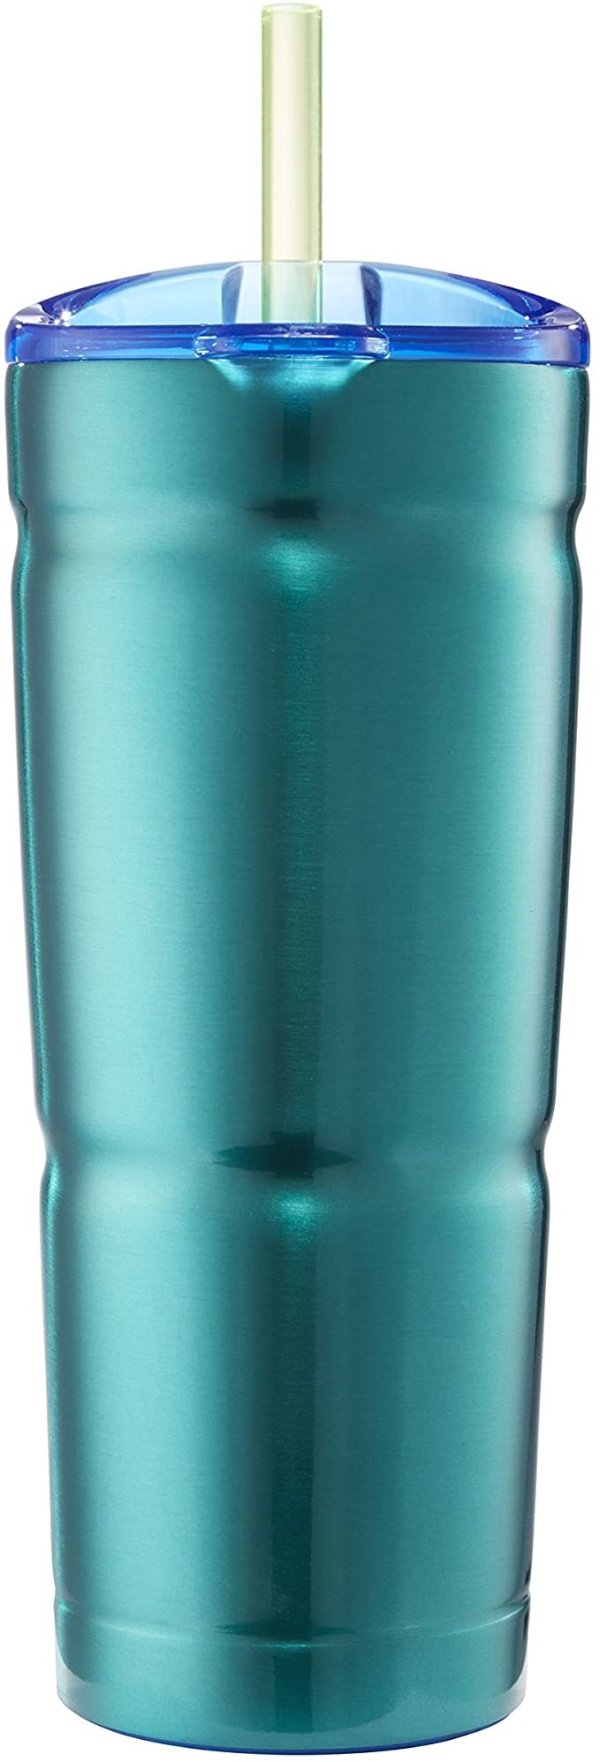 Envy S Vacuum-Insulated Stainless Steel Tumbler with Straw, 24 oz., Island Teal